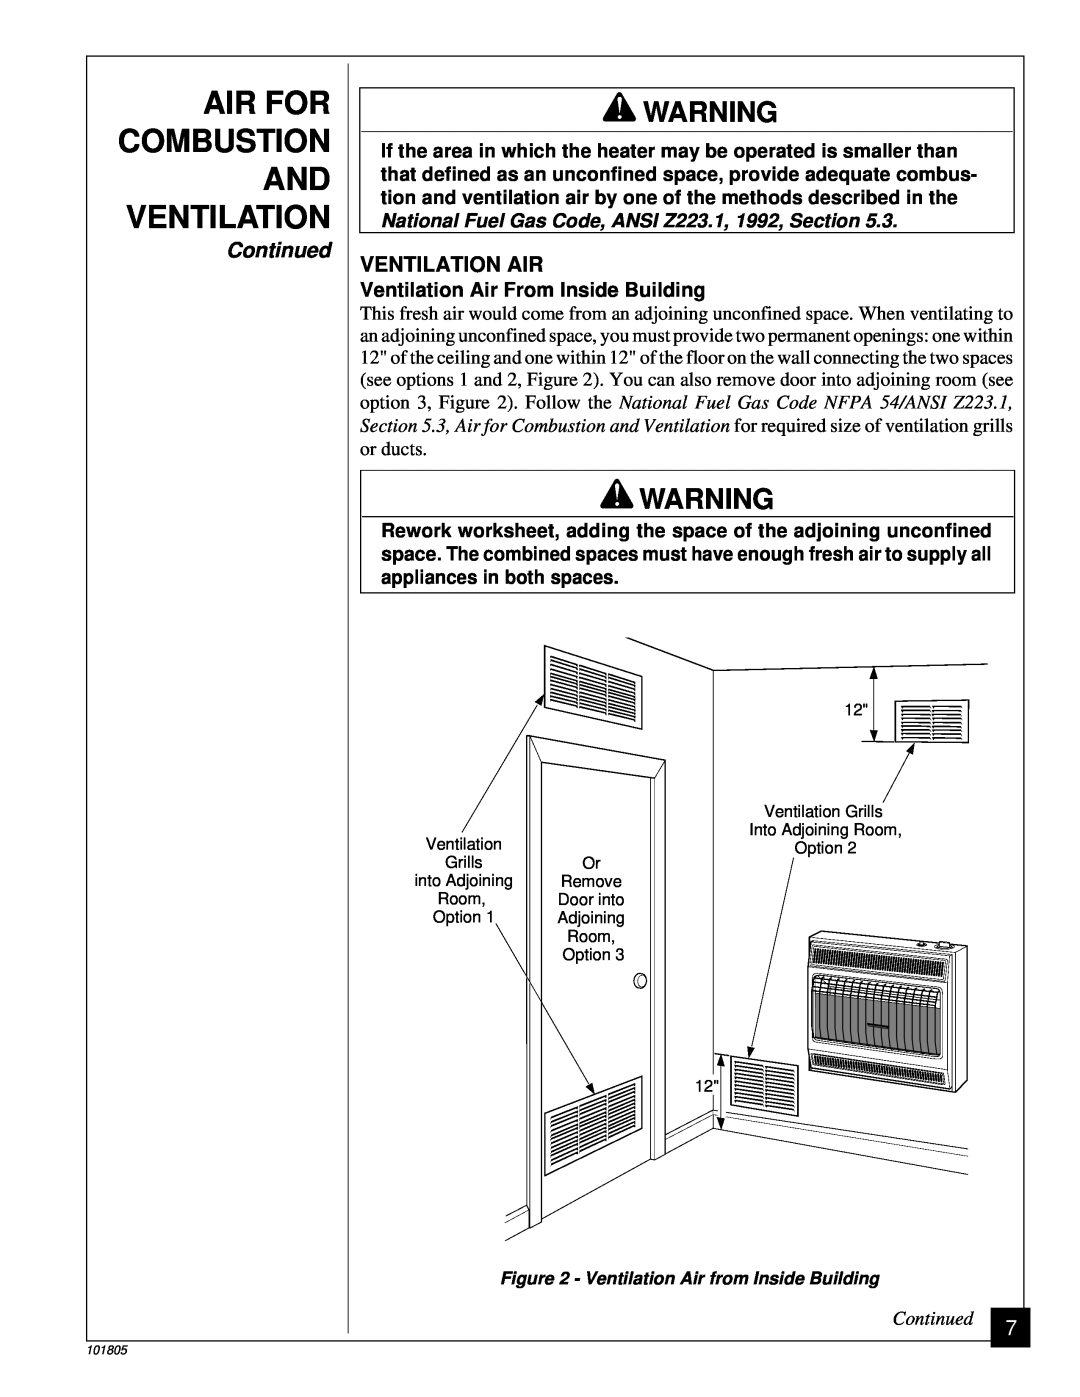 Desa RP30C, CGP18C Air For Combustion And Ventilation, Continued, Ventilation Air From Inside Building 